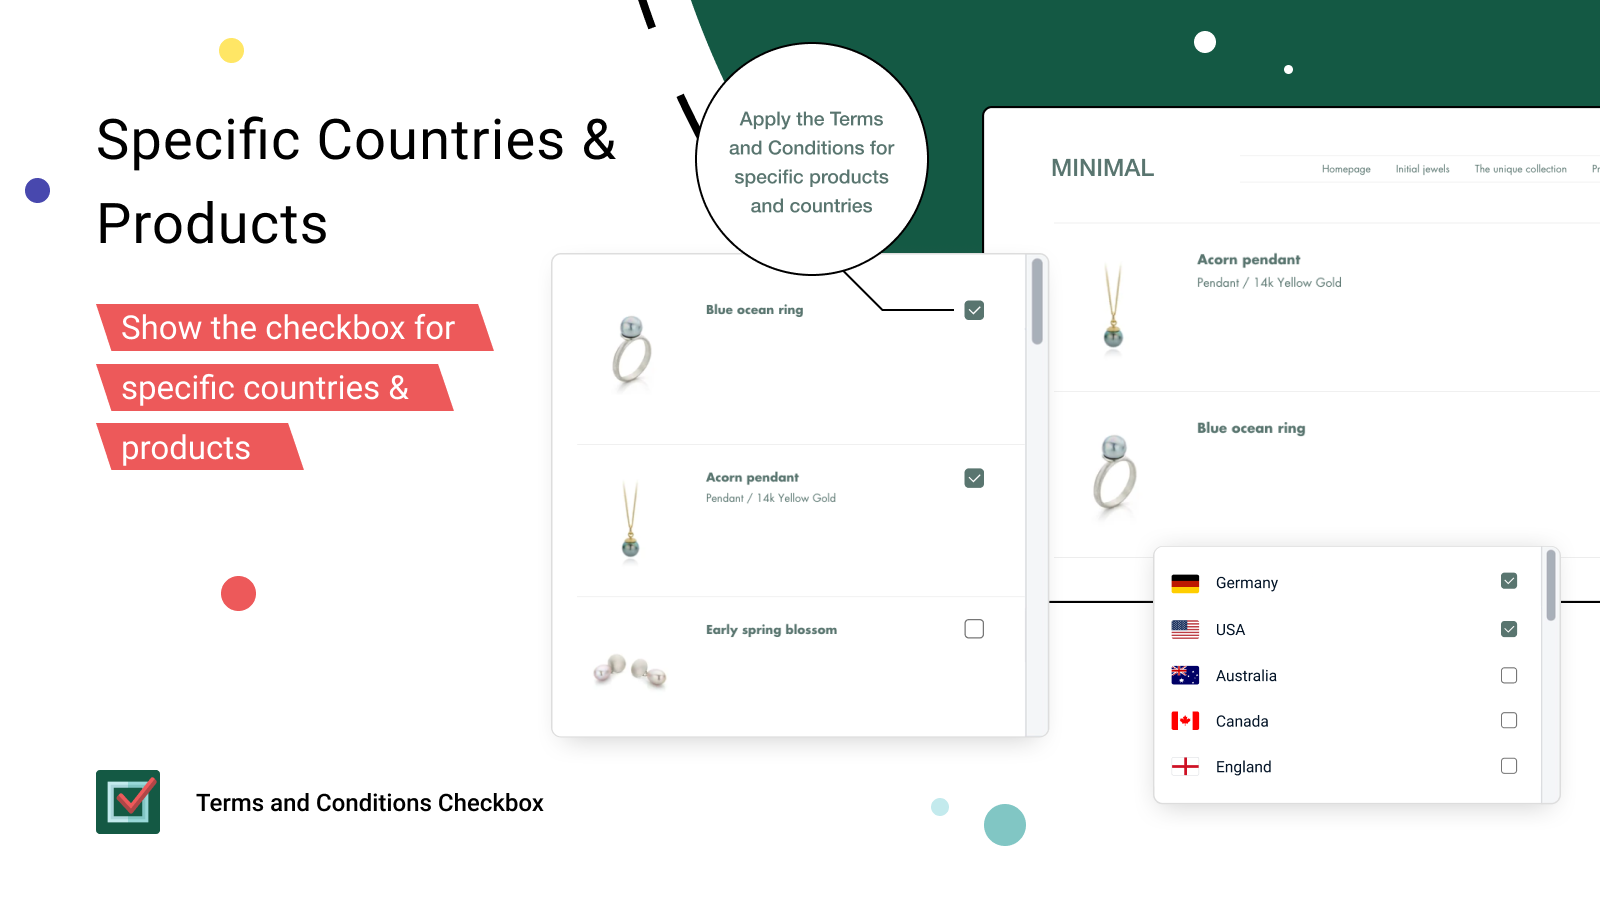 The checkbox can be added for specific products and countries